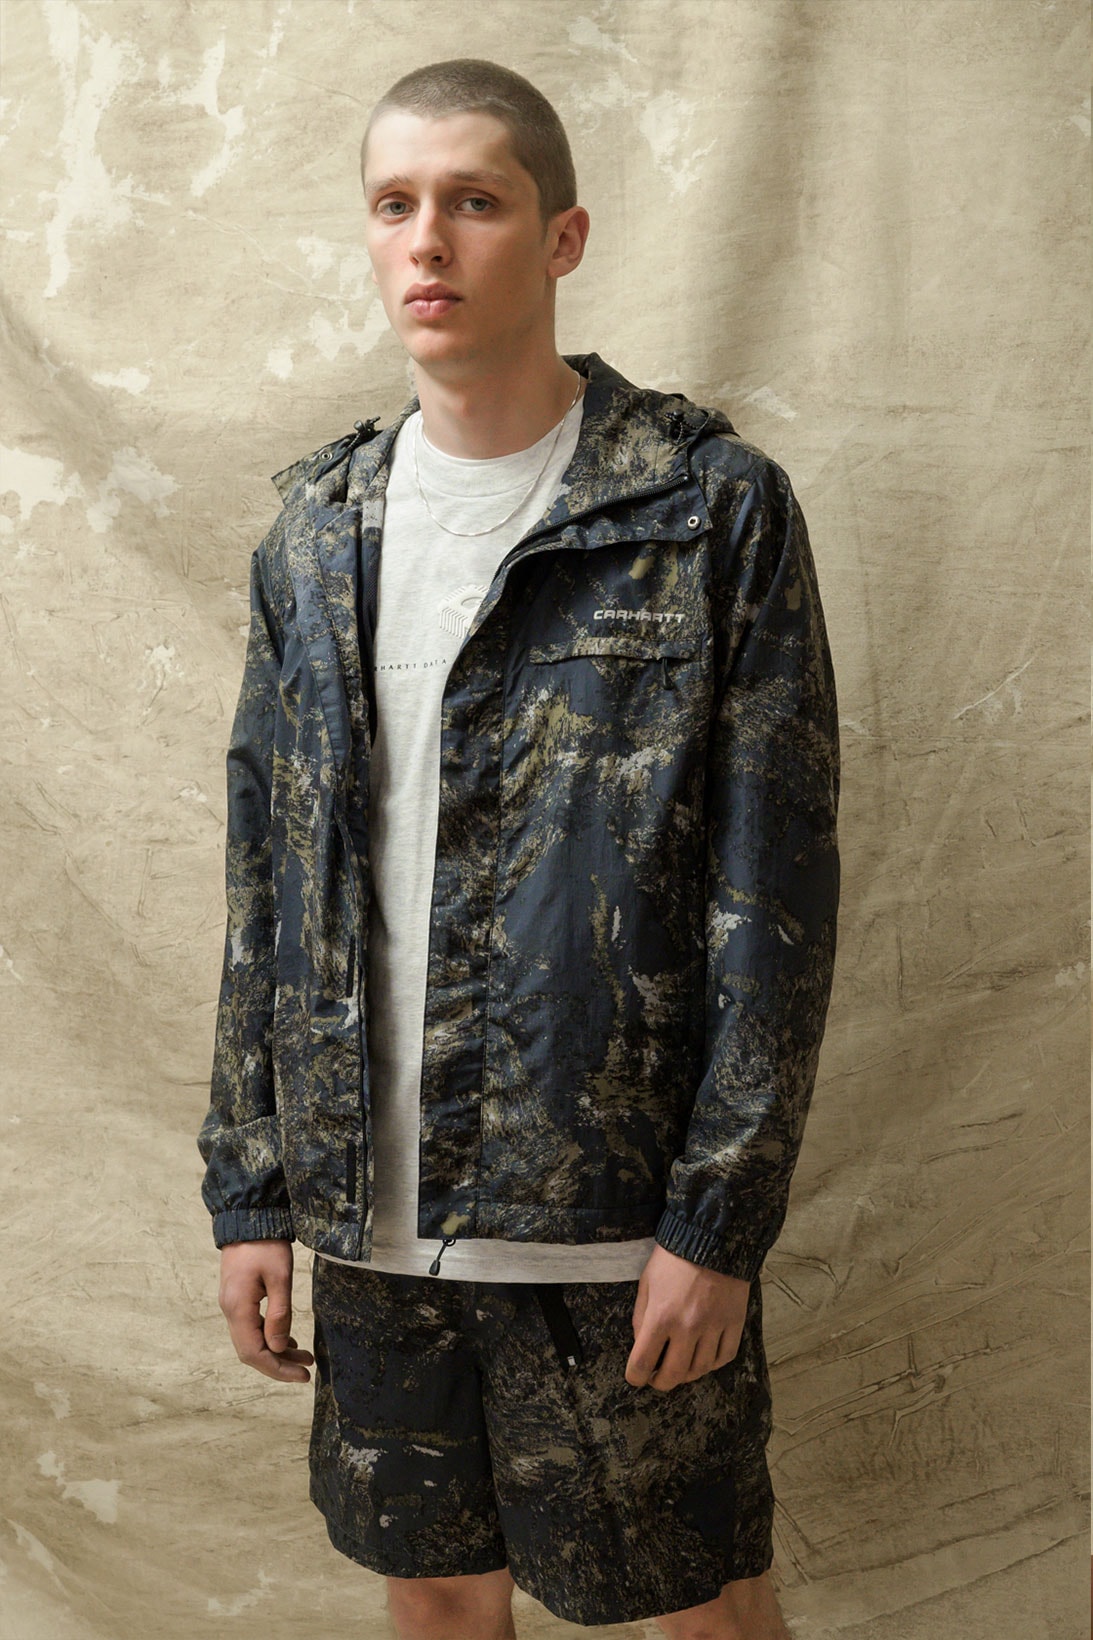 carhartt wip spring summer 2021 ss21 collection lookbook military camouflage jacket shorts